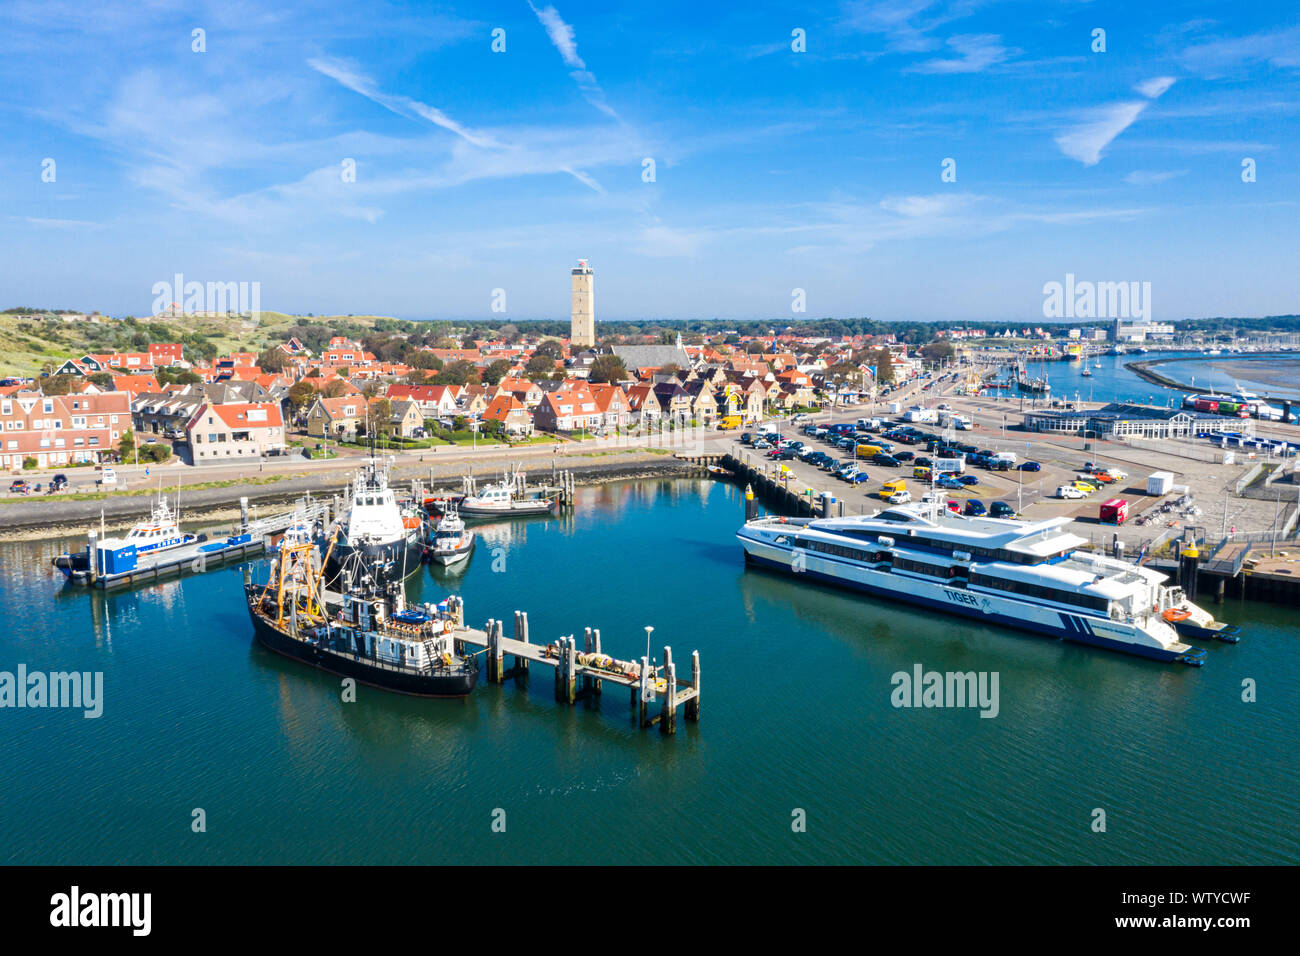 Netherlands, Terschelling - Aug 25, 2019: Brandaris lighthouse towers up. Catamaran MS Tiger moored to a wharf and other vessels along piers, in the h Stock Photo